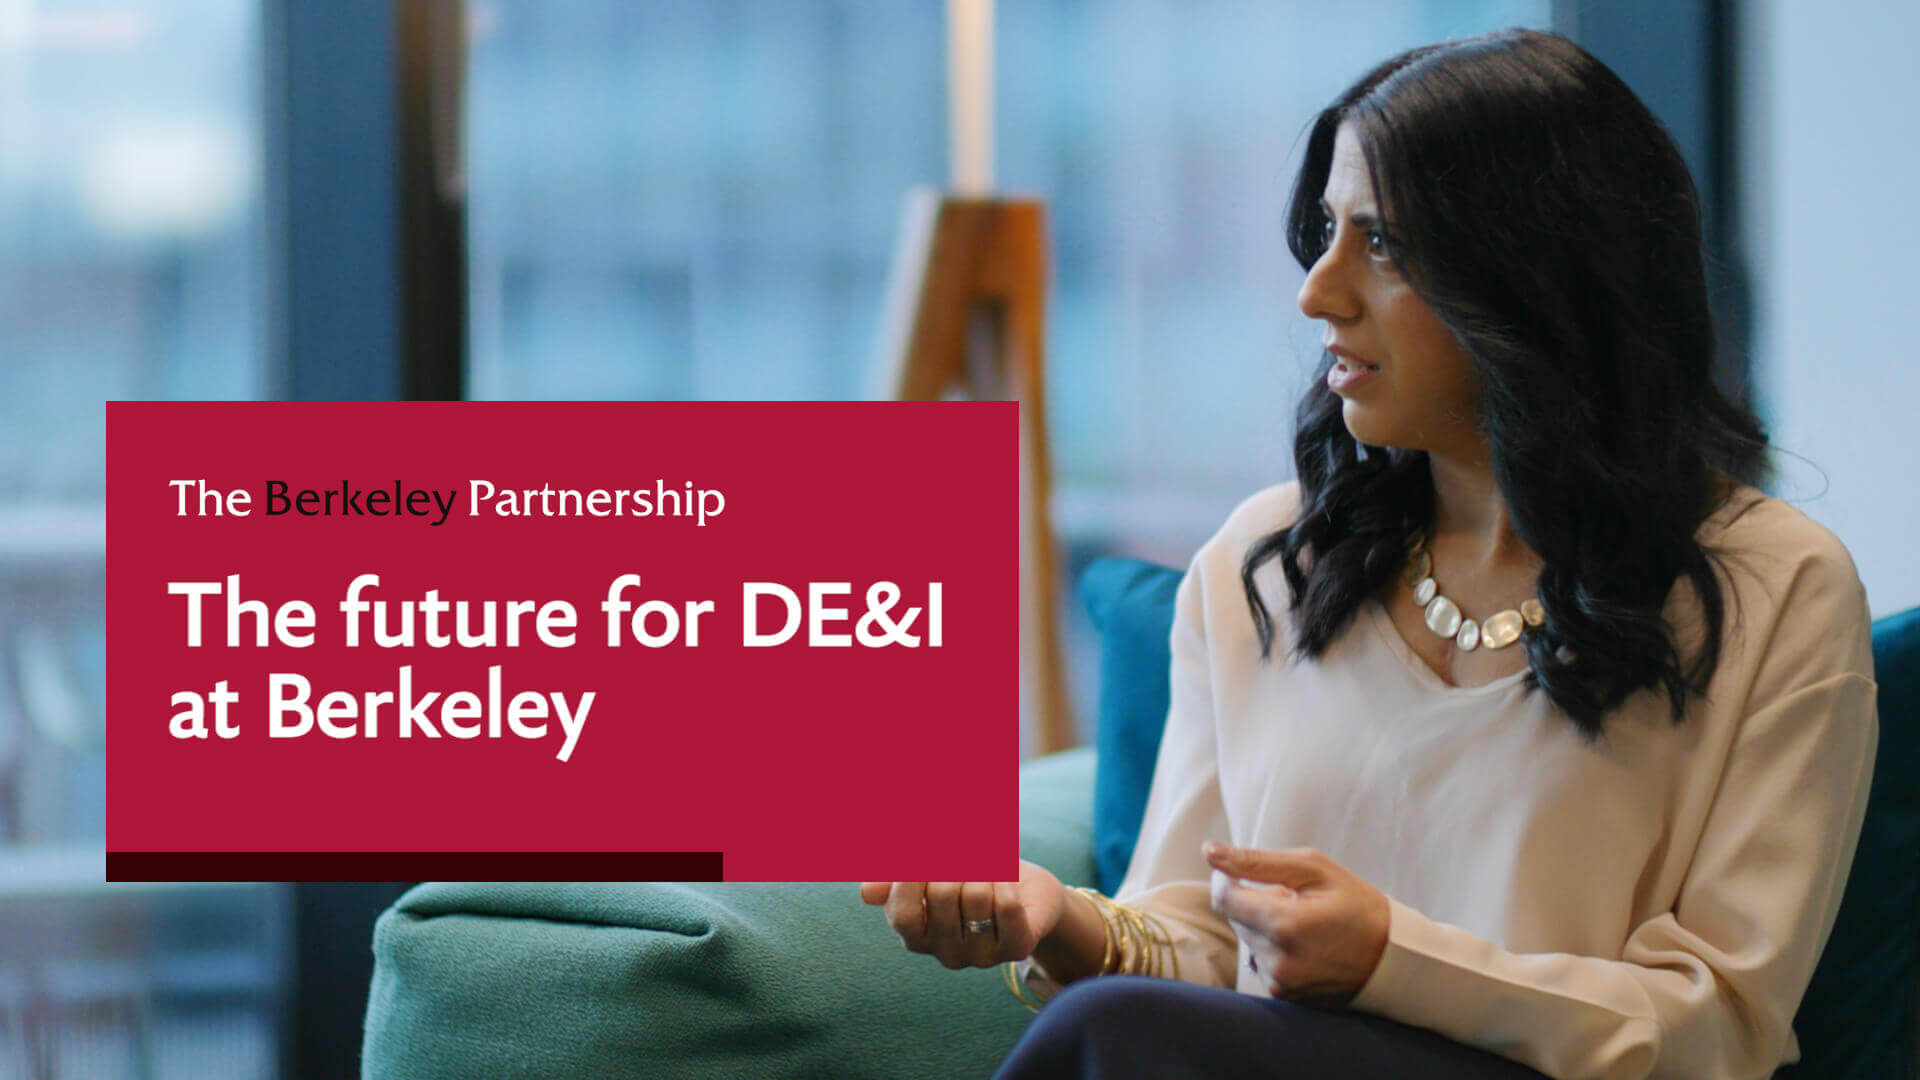 An on-screen banner says 'The future for DE&I at Berkeley'. In the background, a female Berkeley partner is sitting down, speaking to someone off-screen